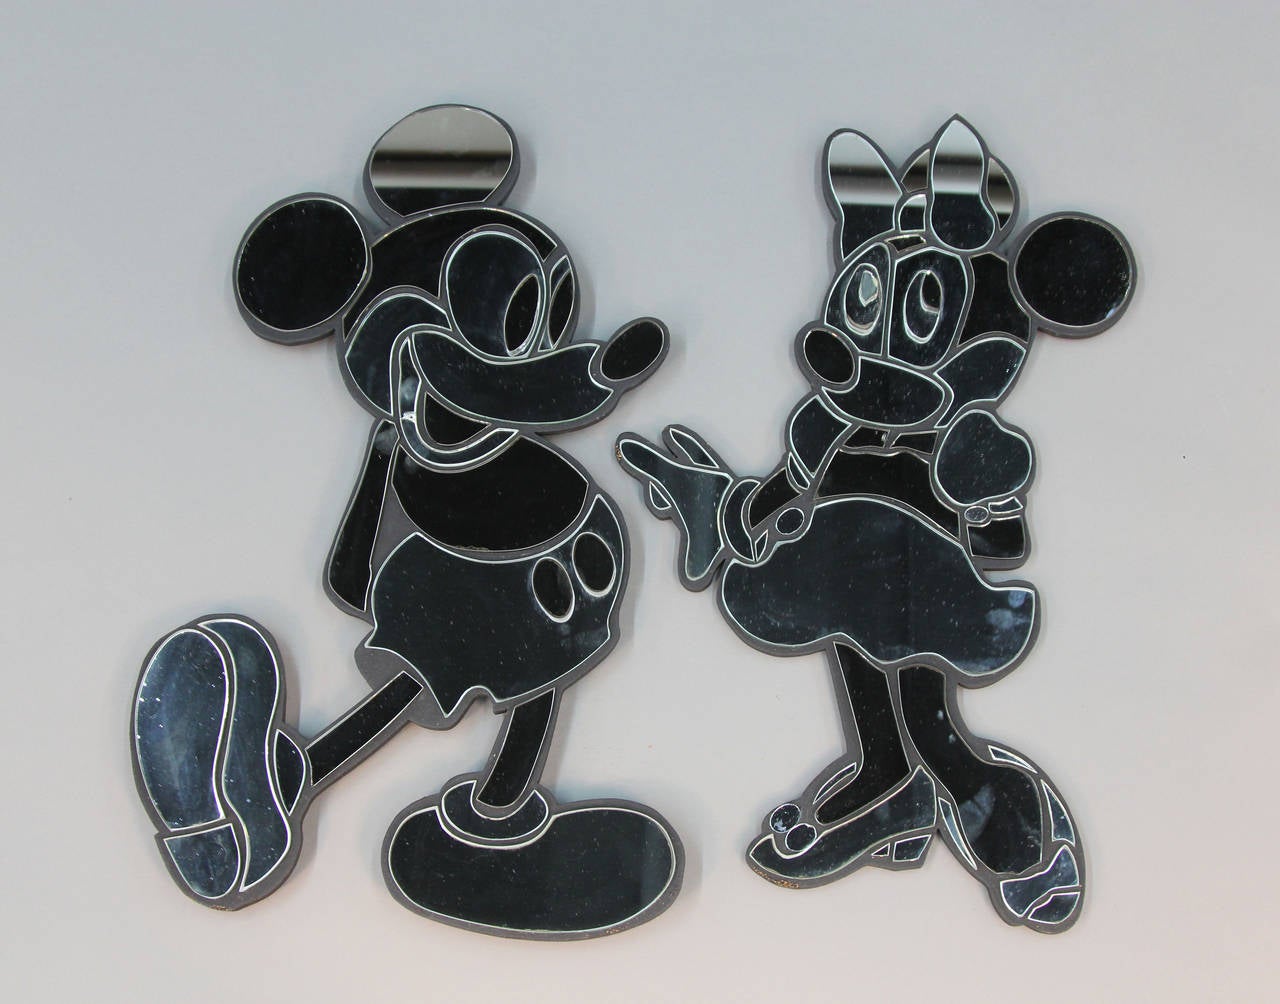 This fantastic pair of mirrors featuring Walt Disney’s beloved Mickey Mouse & Minnie Mouse characters will add whimsy and charm to a child’s room, playroom or any Disney collector’s home or office! Original “Sculptors Guild Ltd., Designs by David